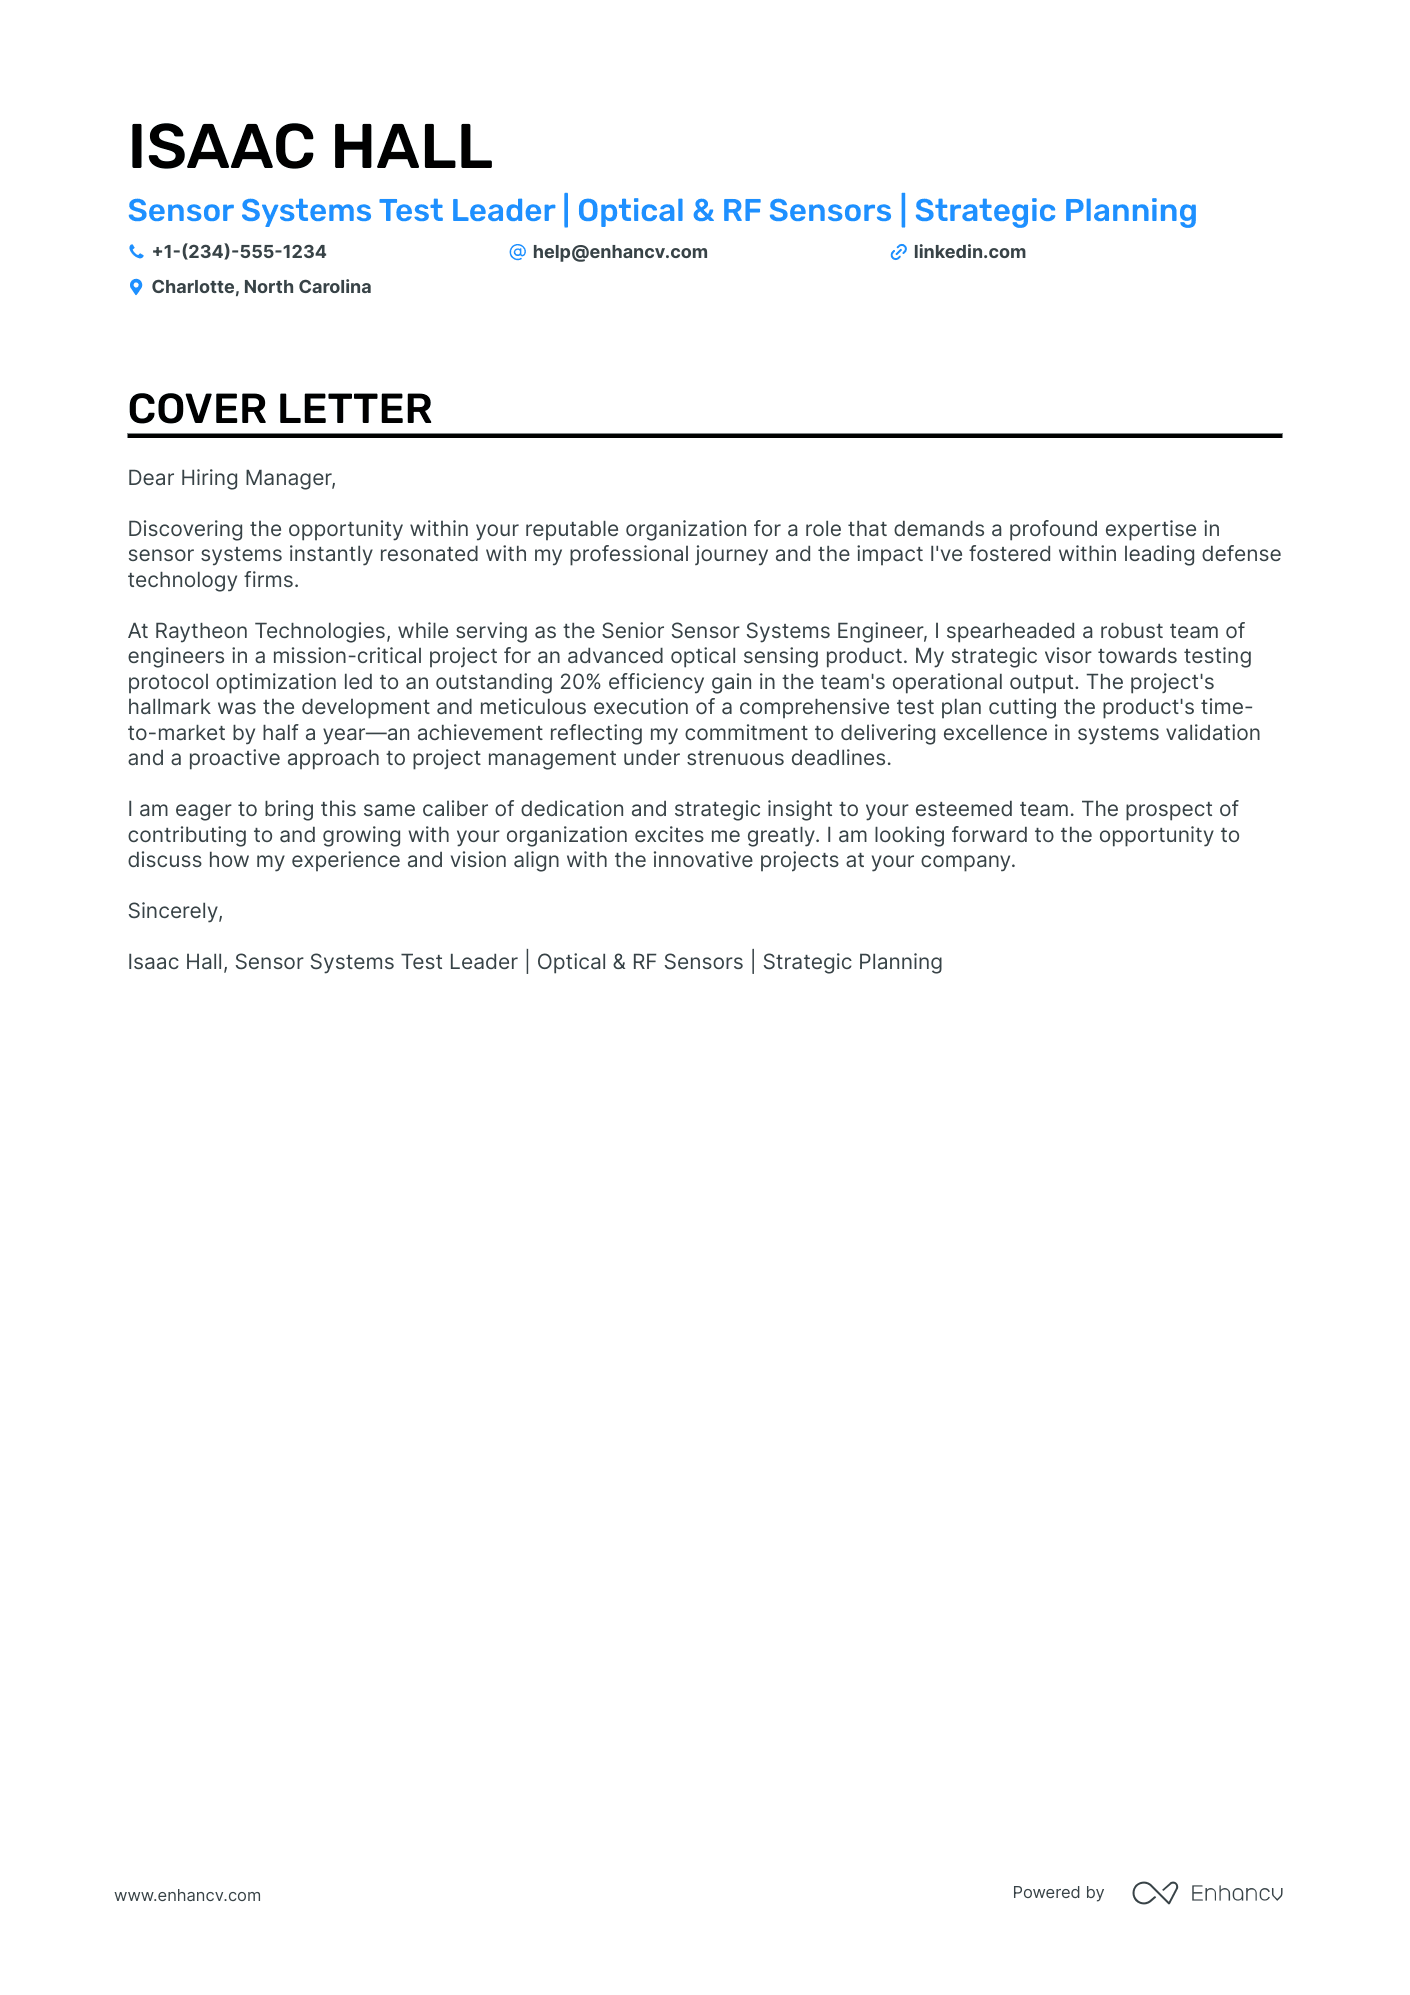 Test Manager cover letter